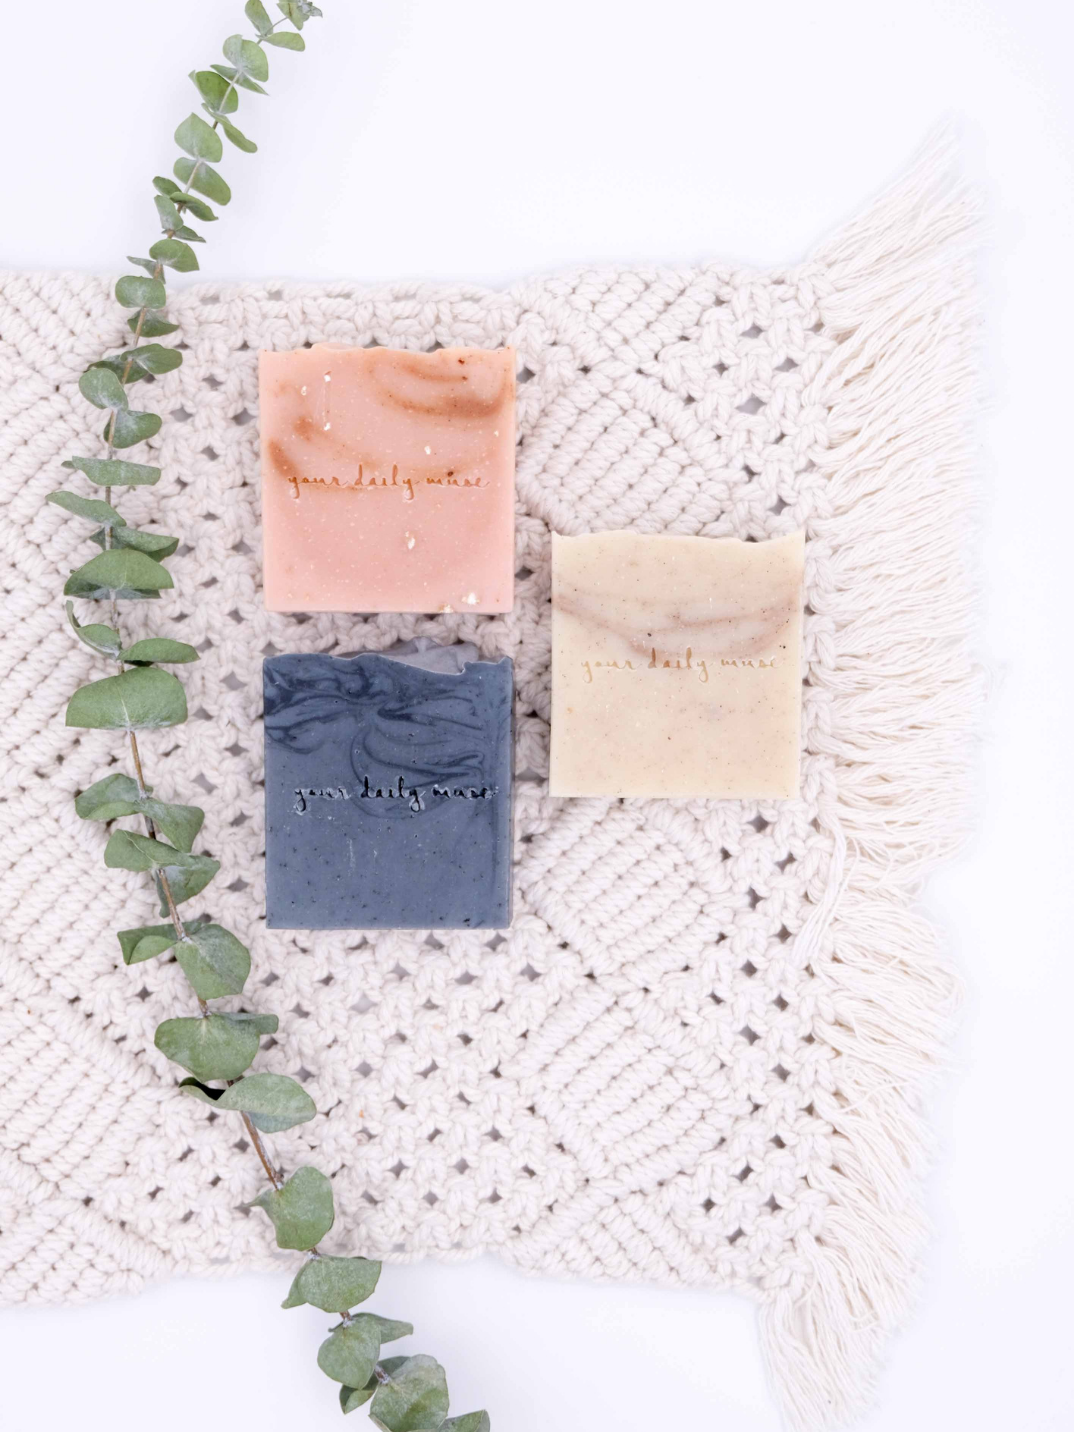 Dream + Wonder Soap Your Daily Muse 100% cruelty-free soap handmade in small batches in Hong Kong